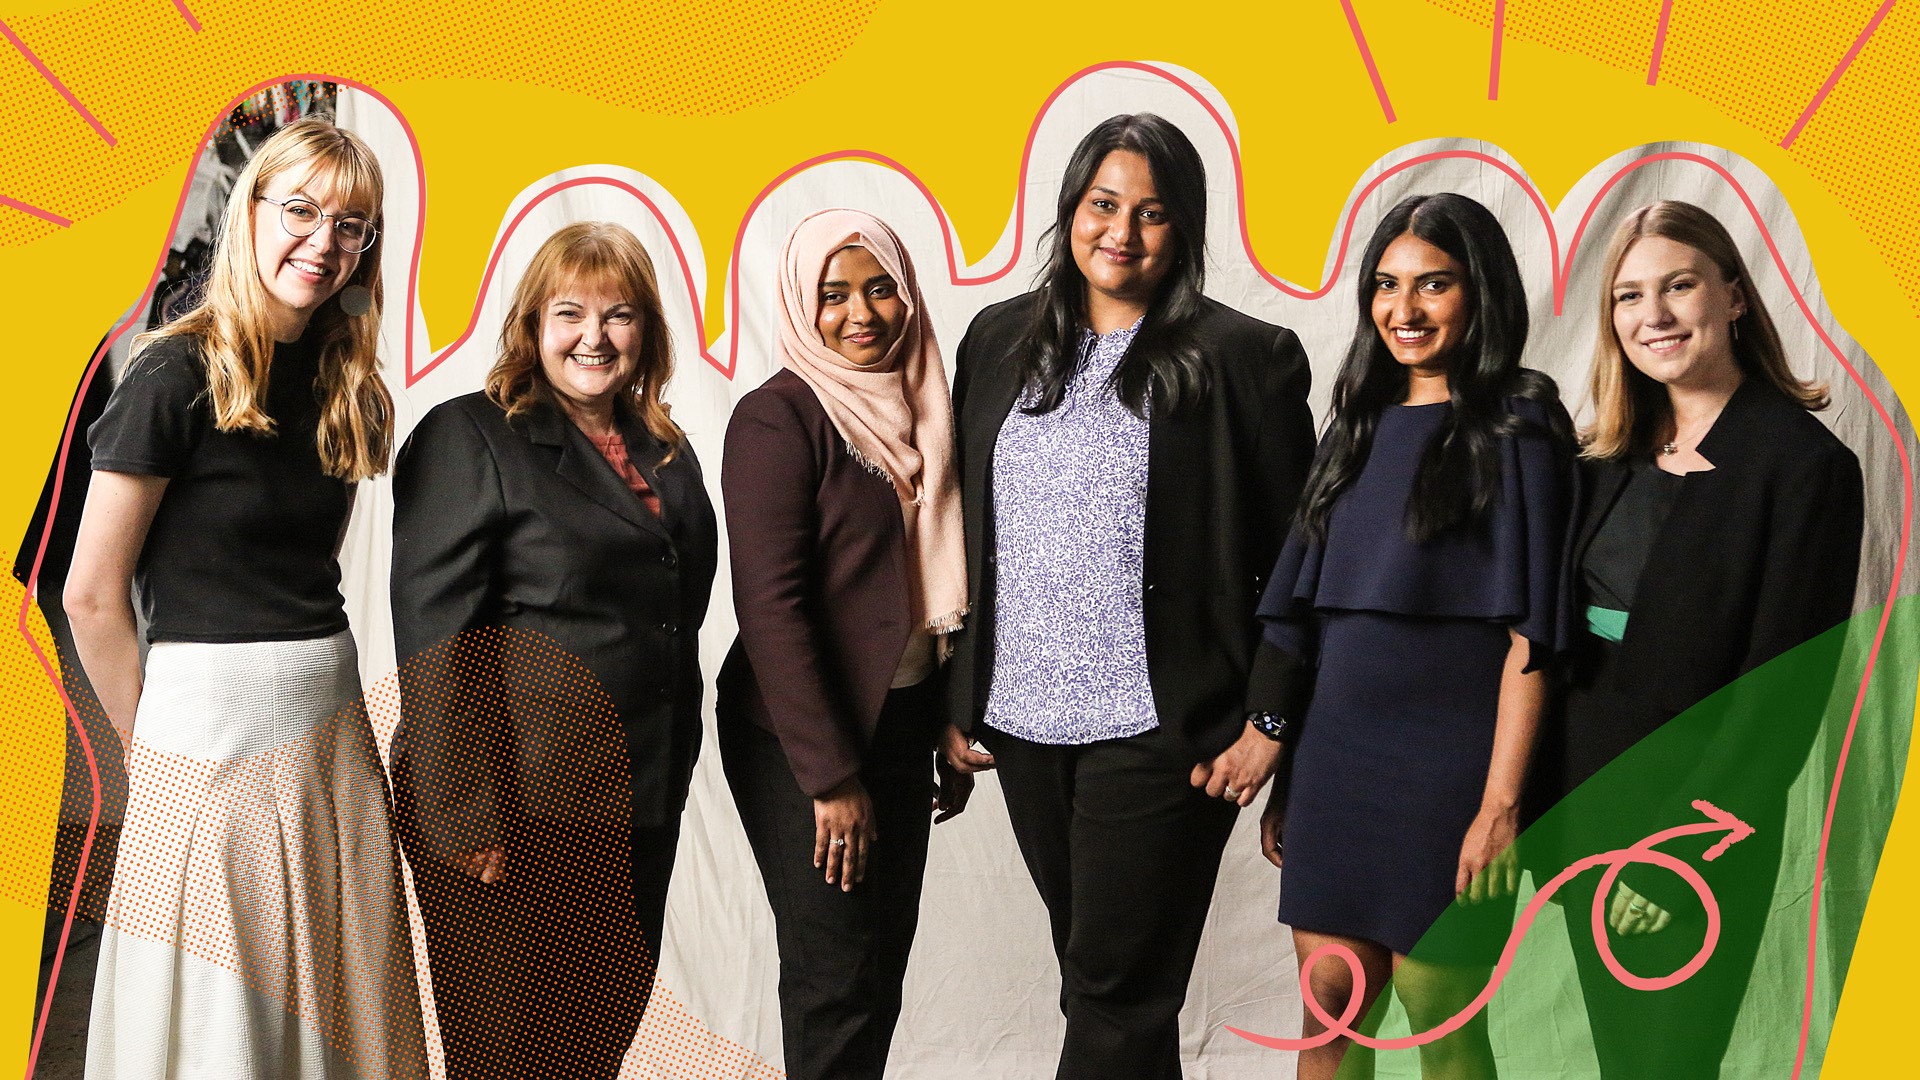 Microsoft staff and Fitted for Work staff and clients pose together in front of a sheet background. They are a diverse group of women.